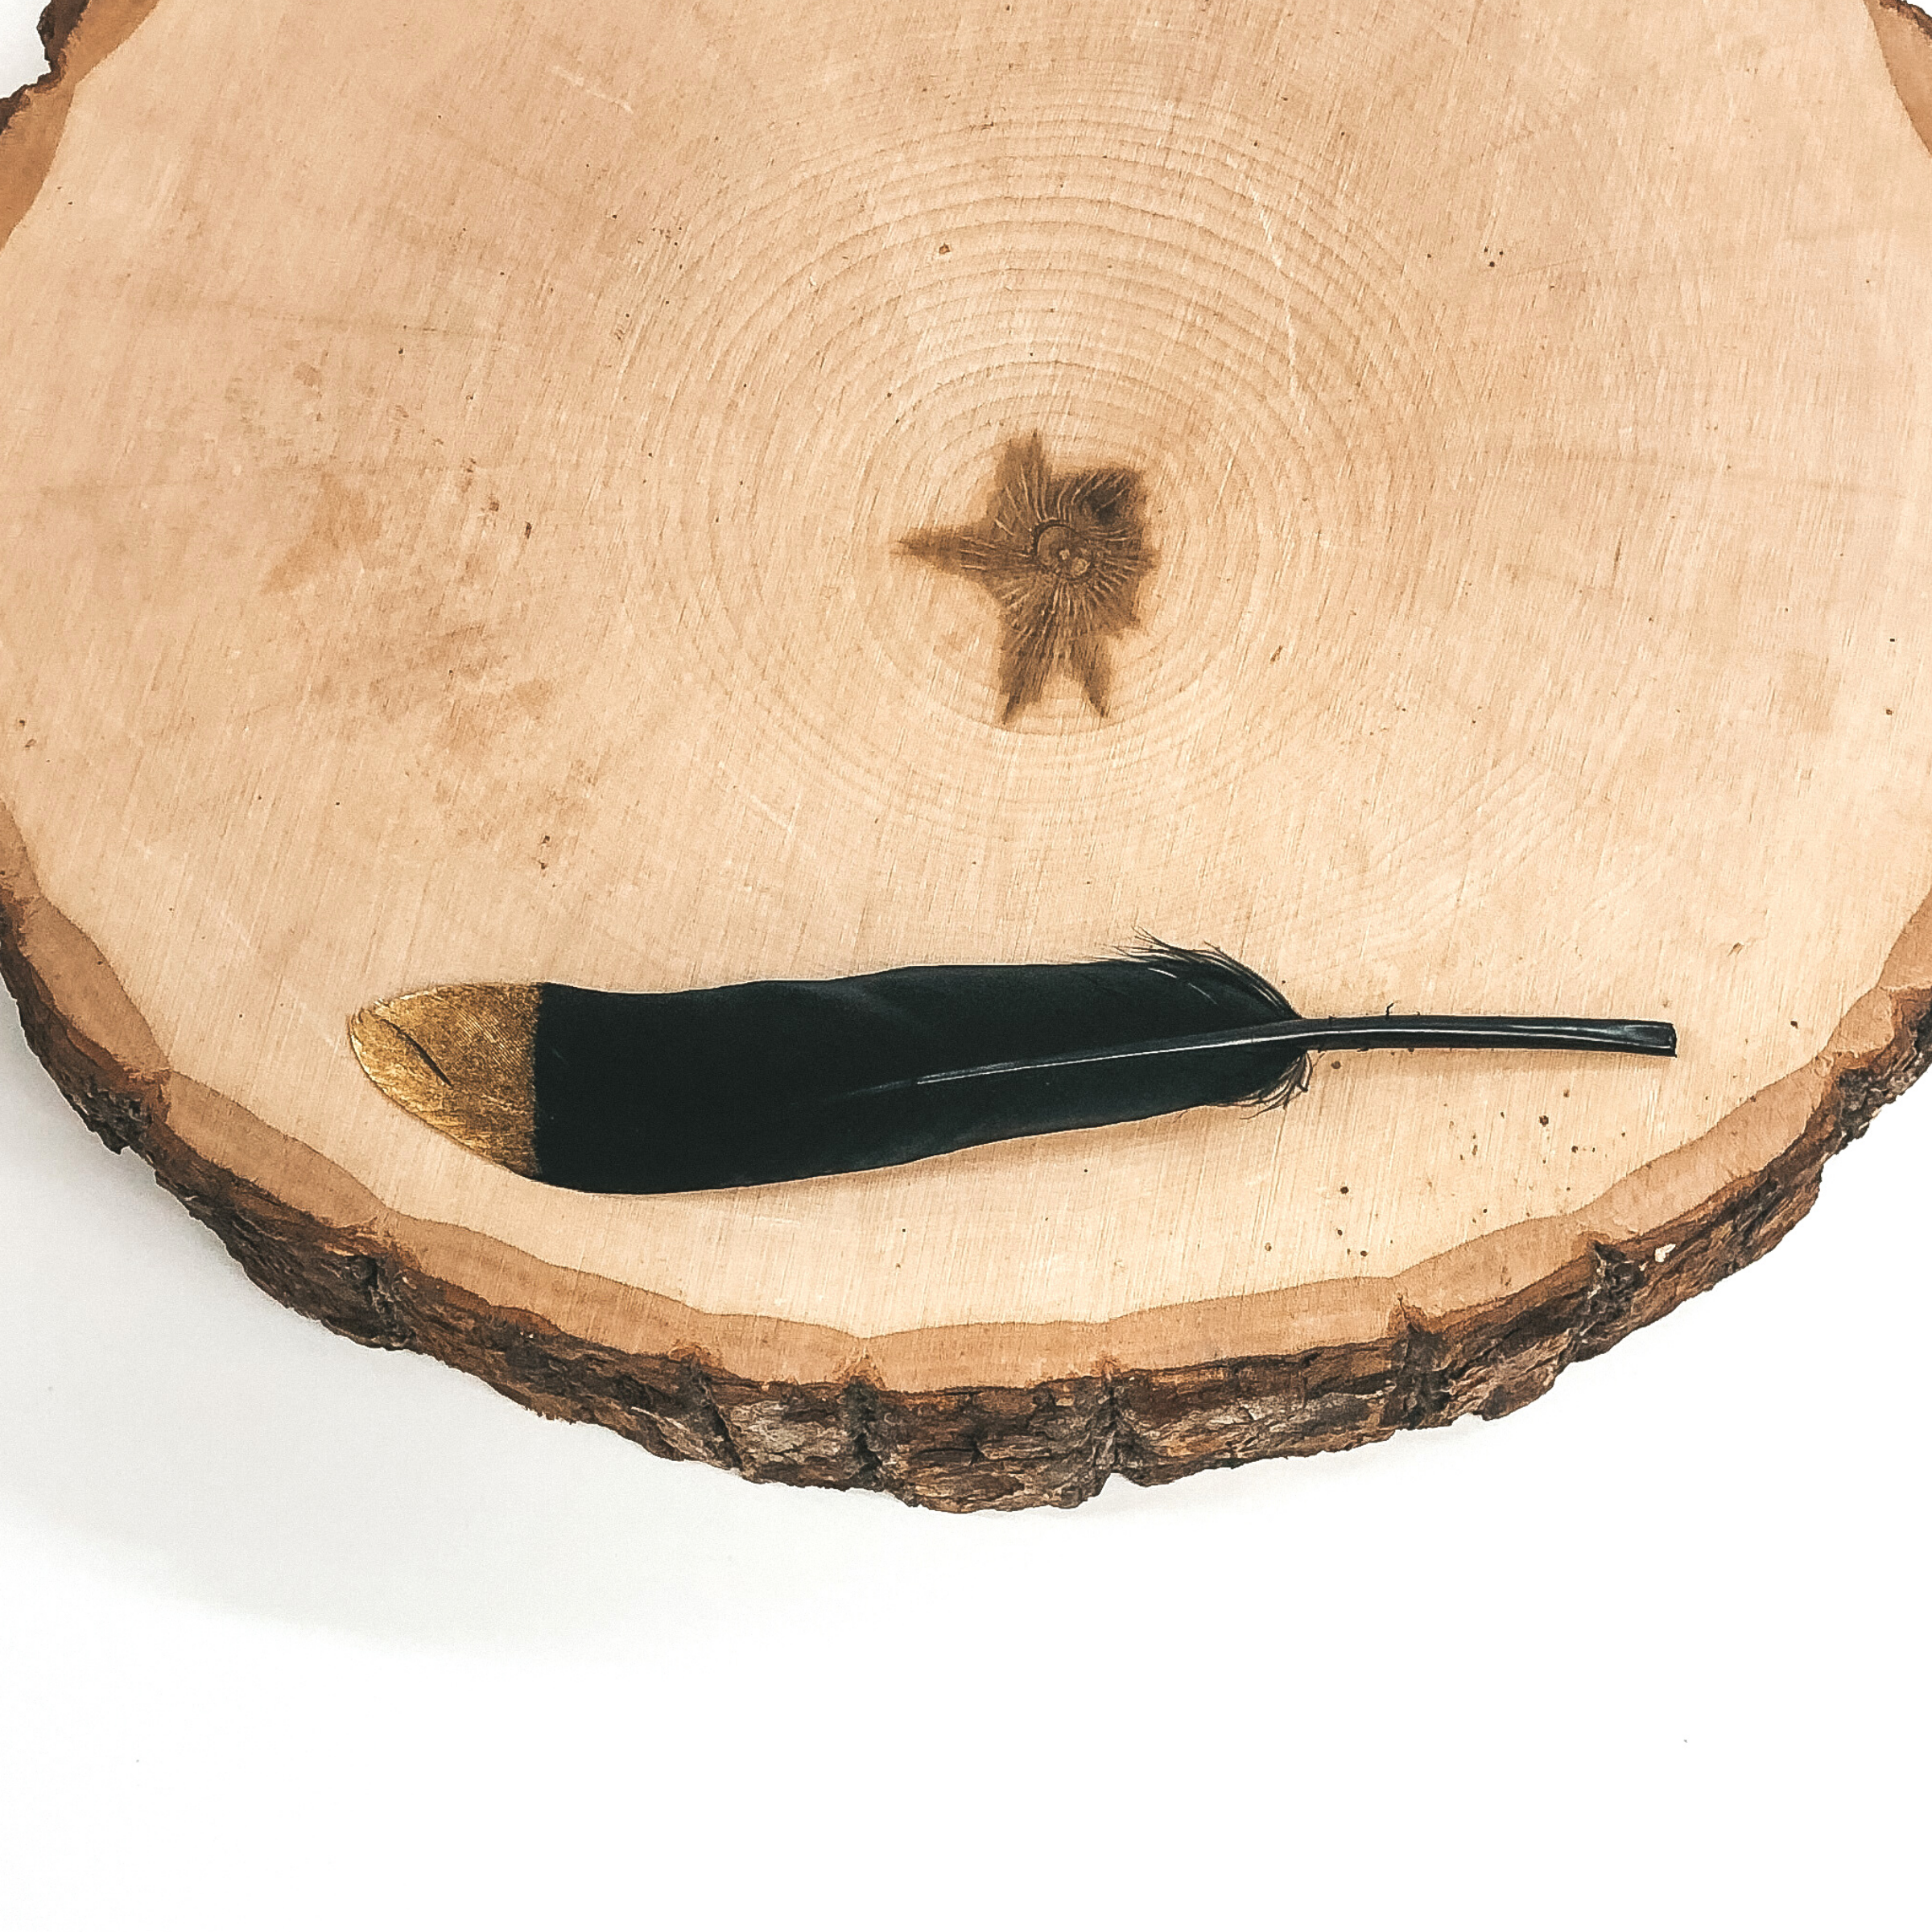 This is a black feather with a gold tip. This feather is pictured on a piece of wood on a white background. 